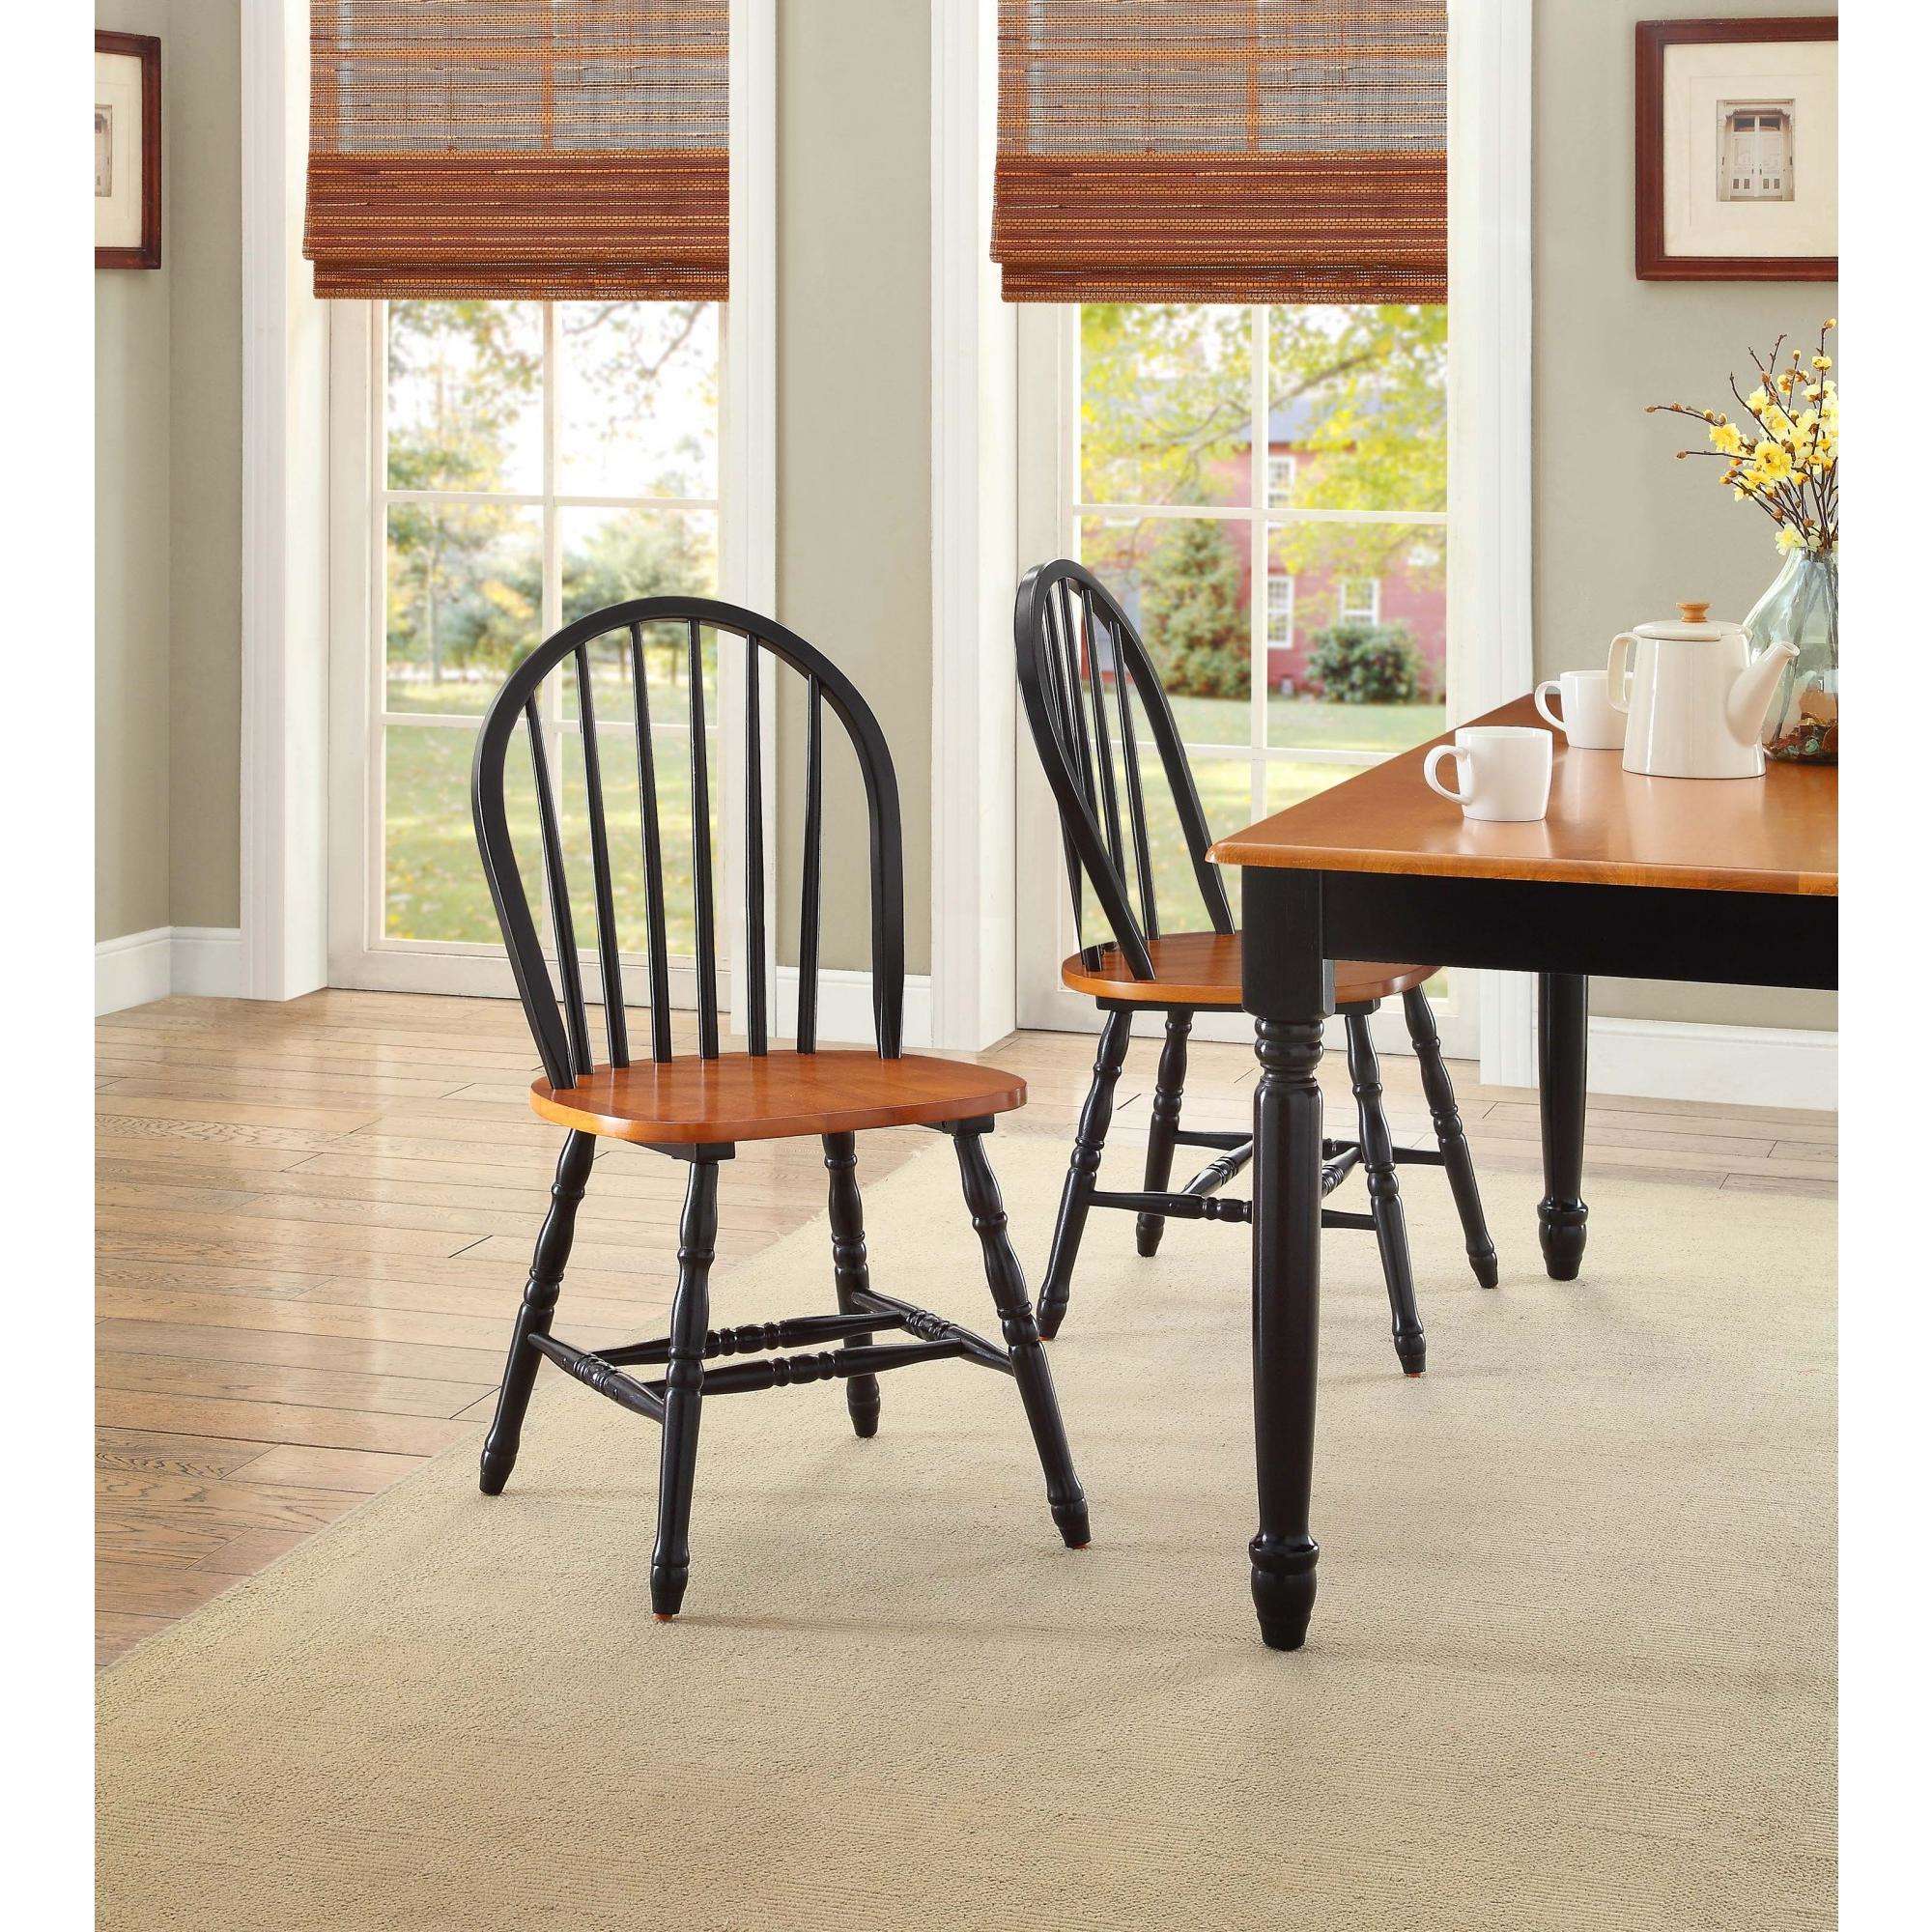 Better Homes and Gardens Autumn Lane Farmhouse 6-Piece Dining Set Bundle, Black and Oak - image 3 of 4